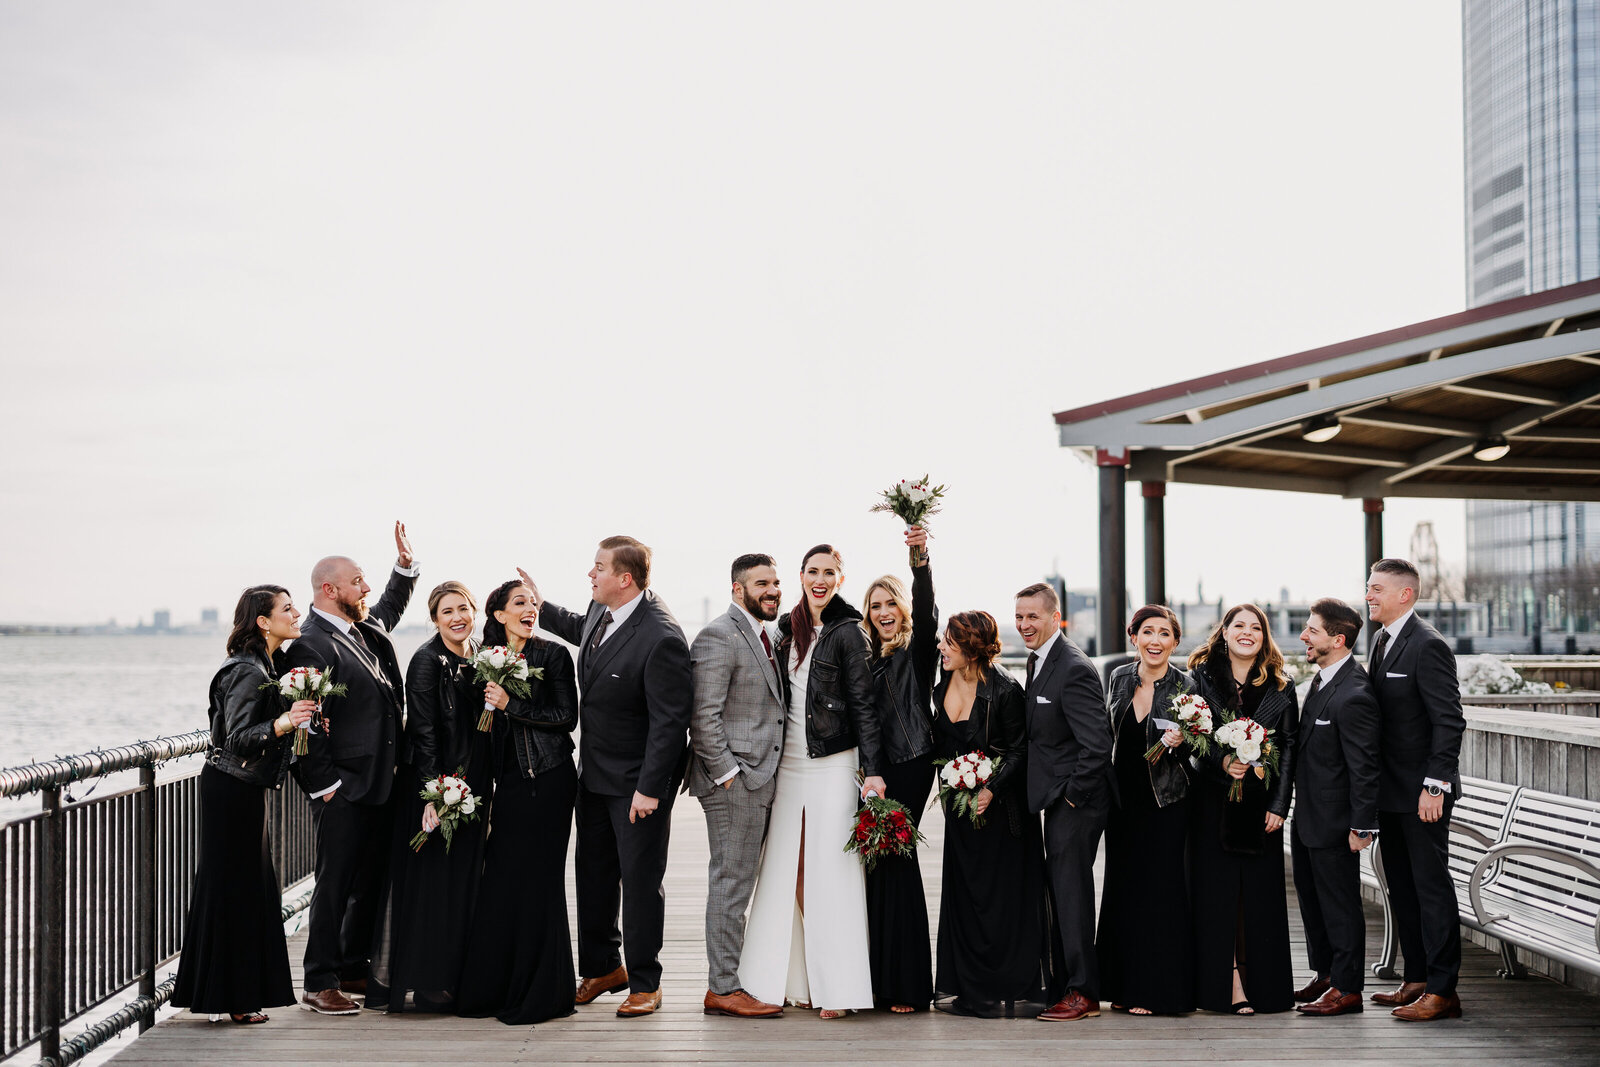 edgy bridal party with leather jackets